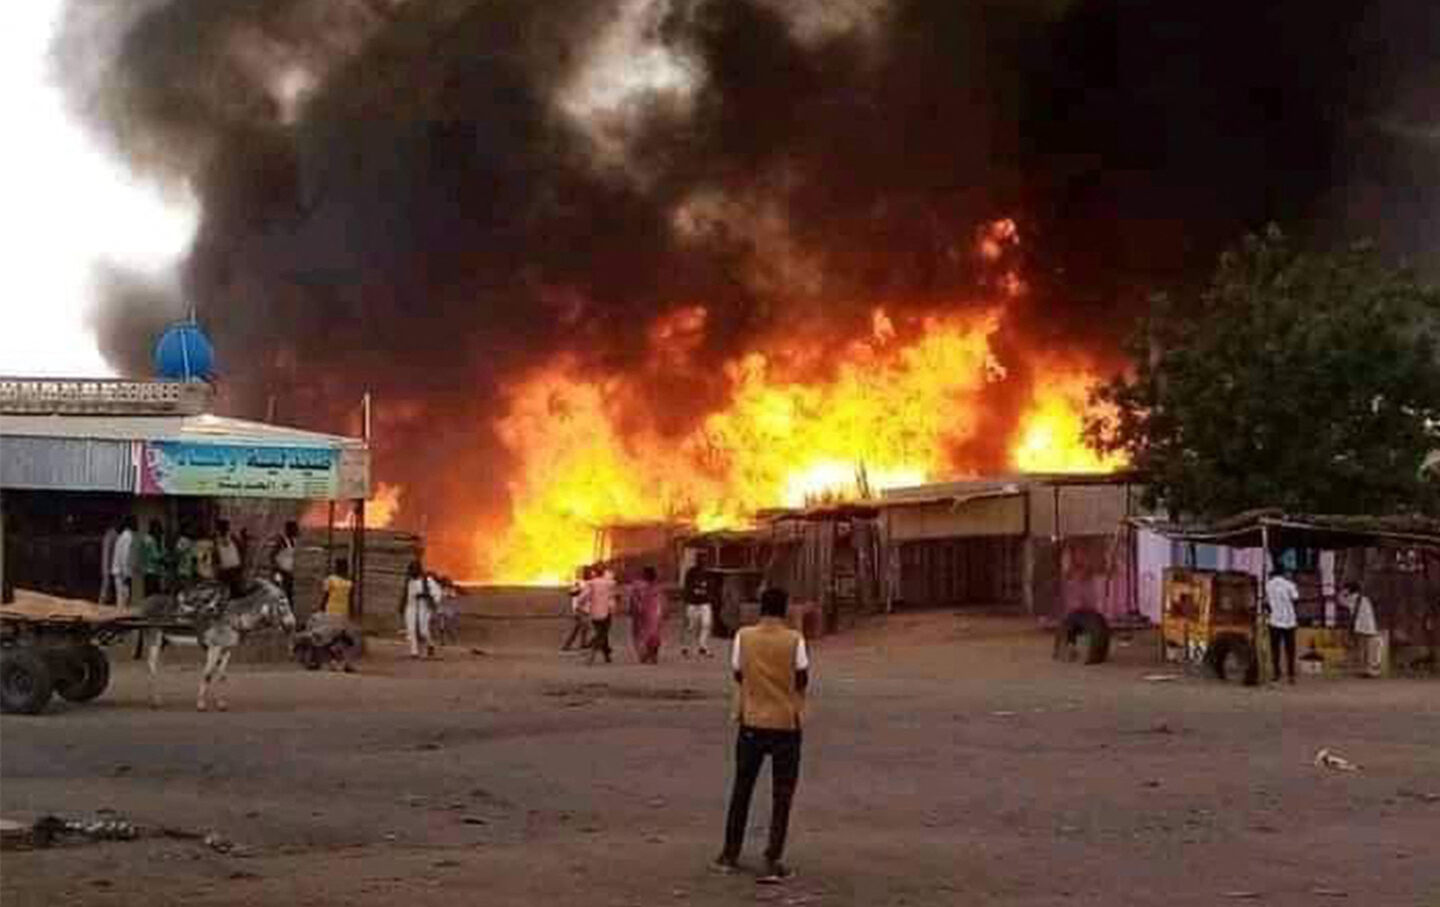 A man stands by as a fire rages in a livestock market area in al-Fasher, the capital of Sudan's North Darfur state, on September 1, 2023, in the aftermath of bombardment by the paramilitary Rapid Support Forces.